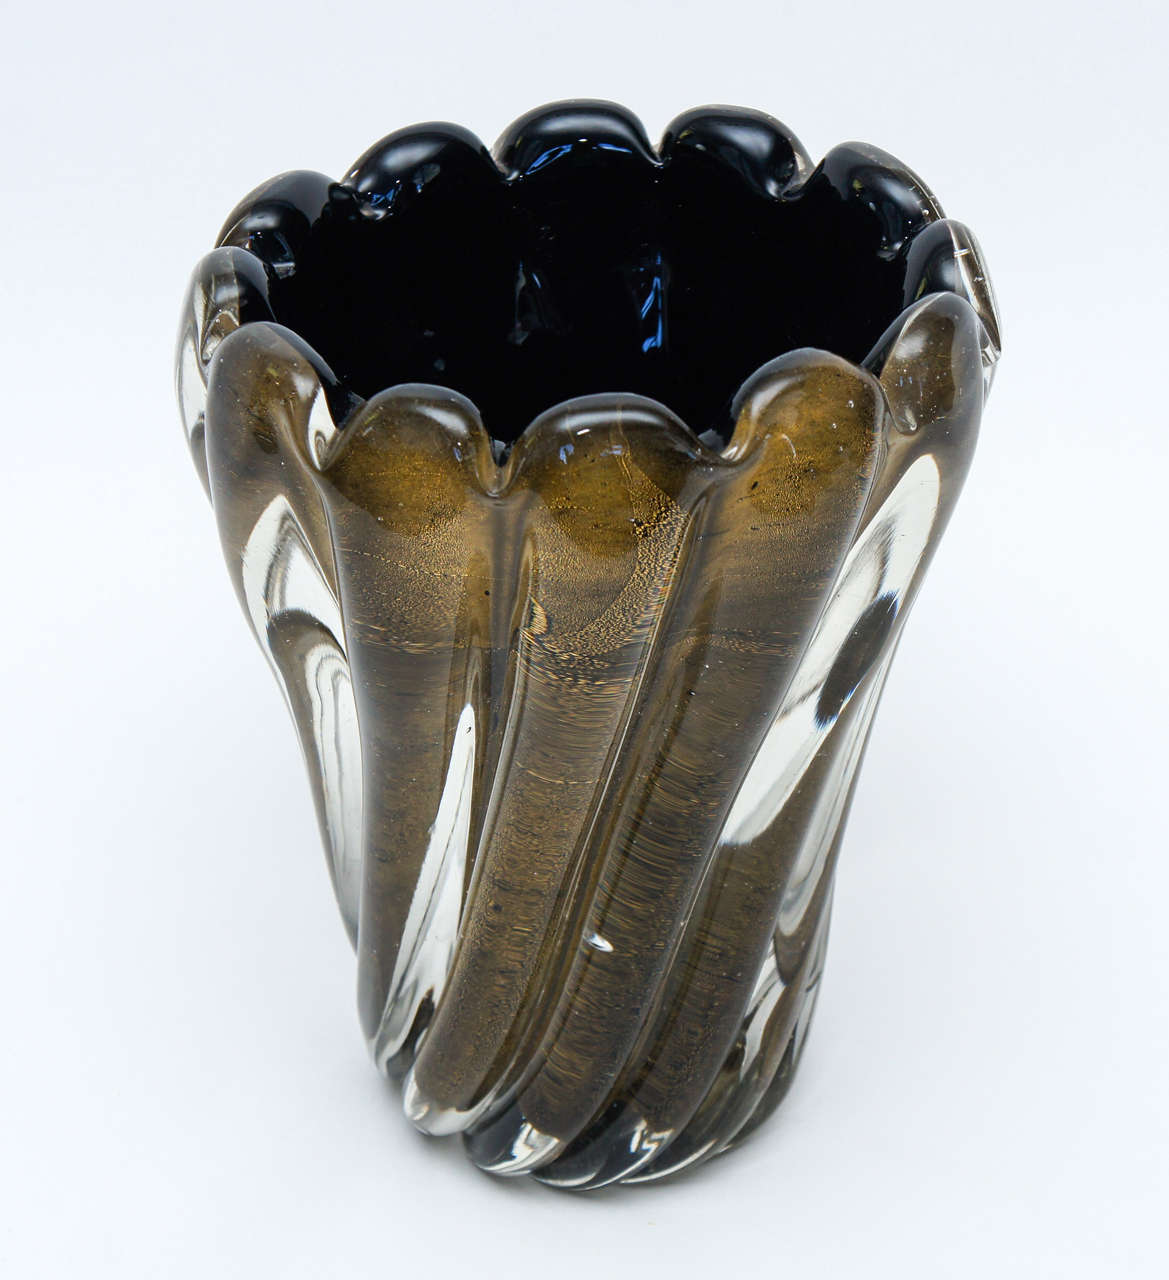 Stunning Italian vase in the Sommerso style. Heavy cased glass with gold dust inclusions creates a dramatic and substantive result. The vase is in excellent condition with bubble inclusions that occurred during production. The pontil is polished and